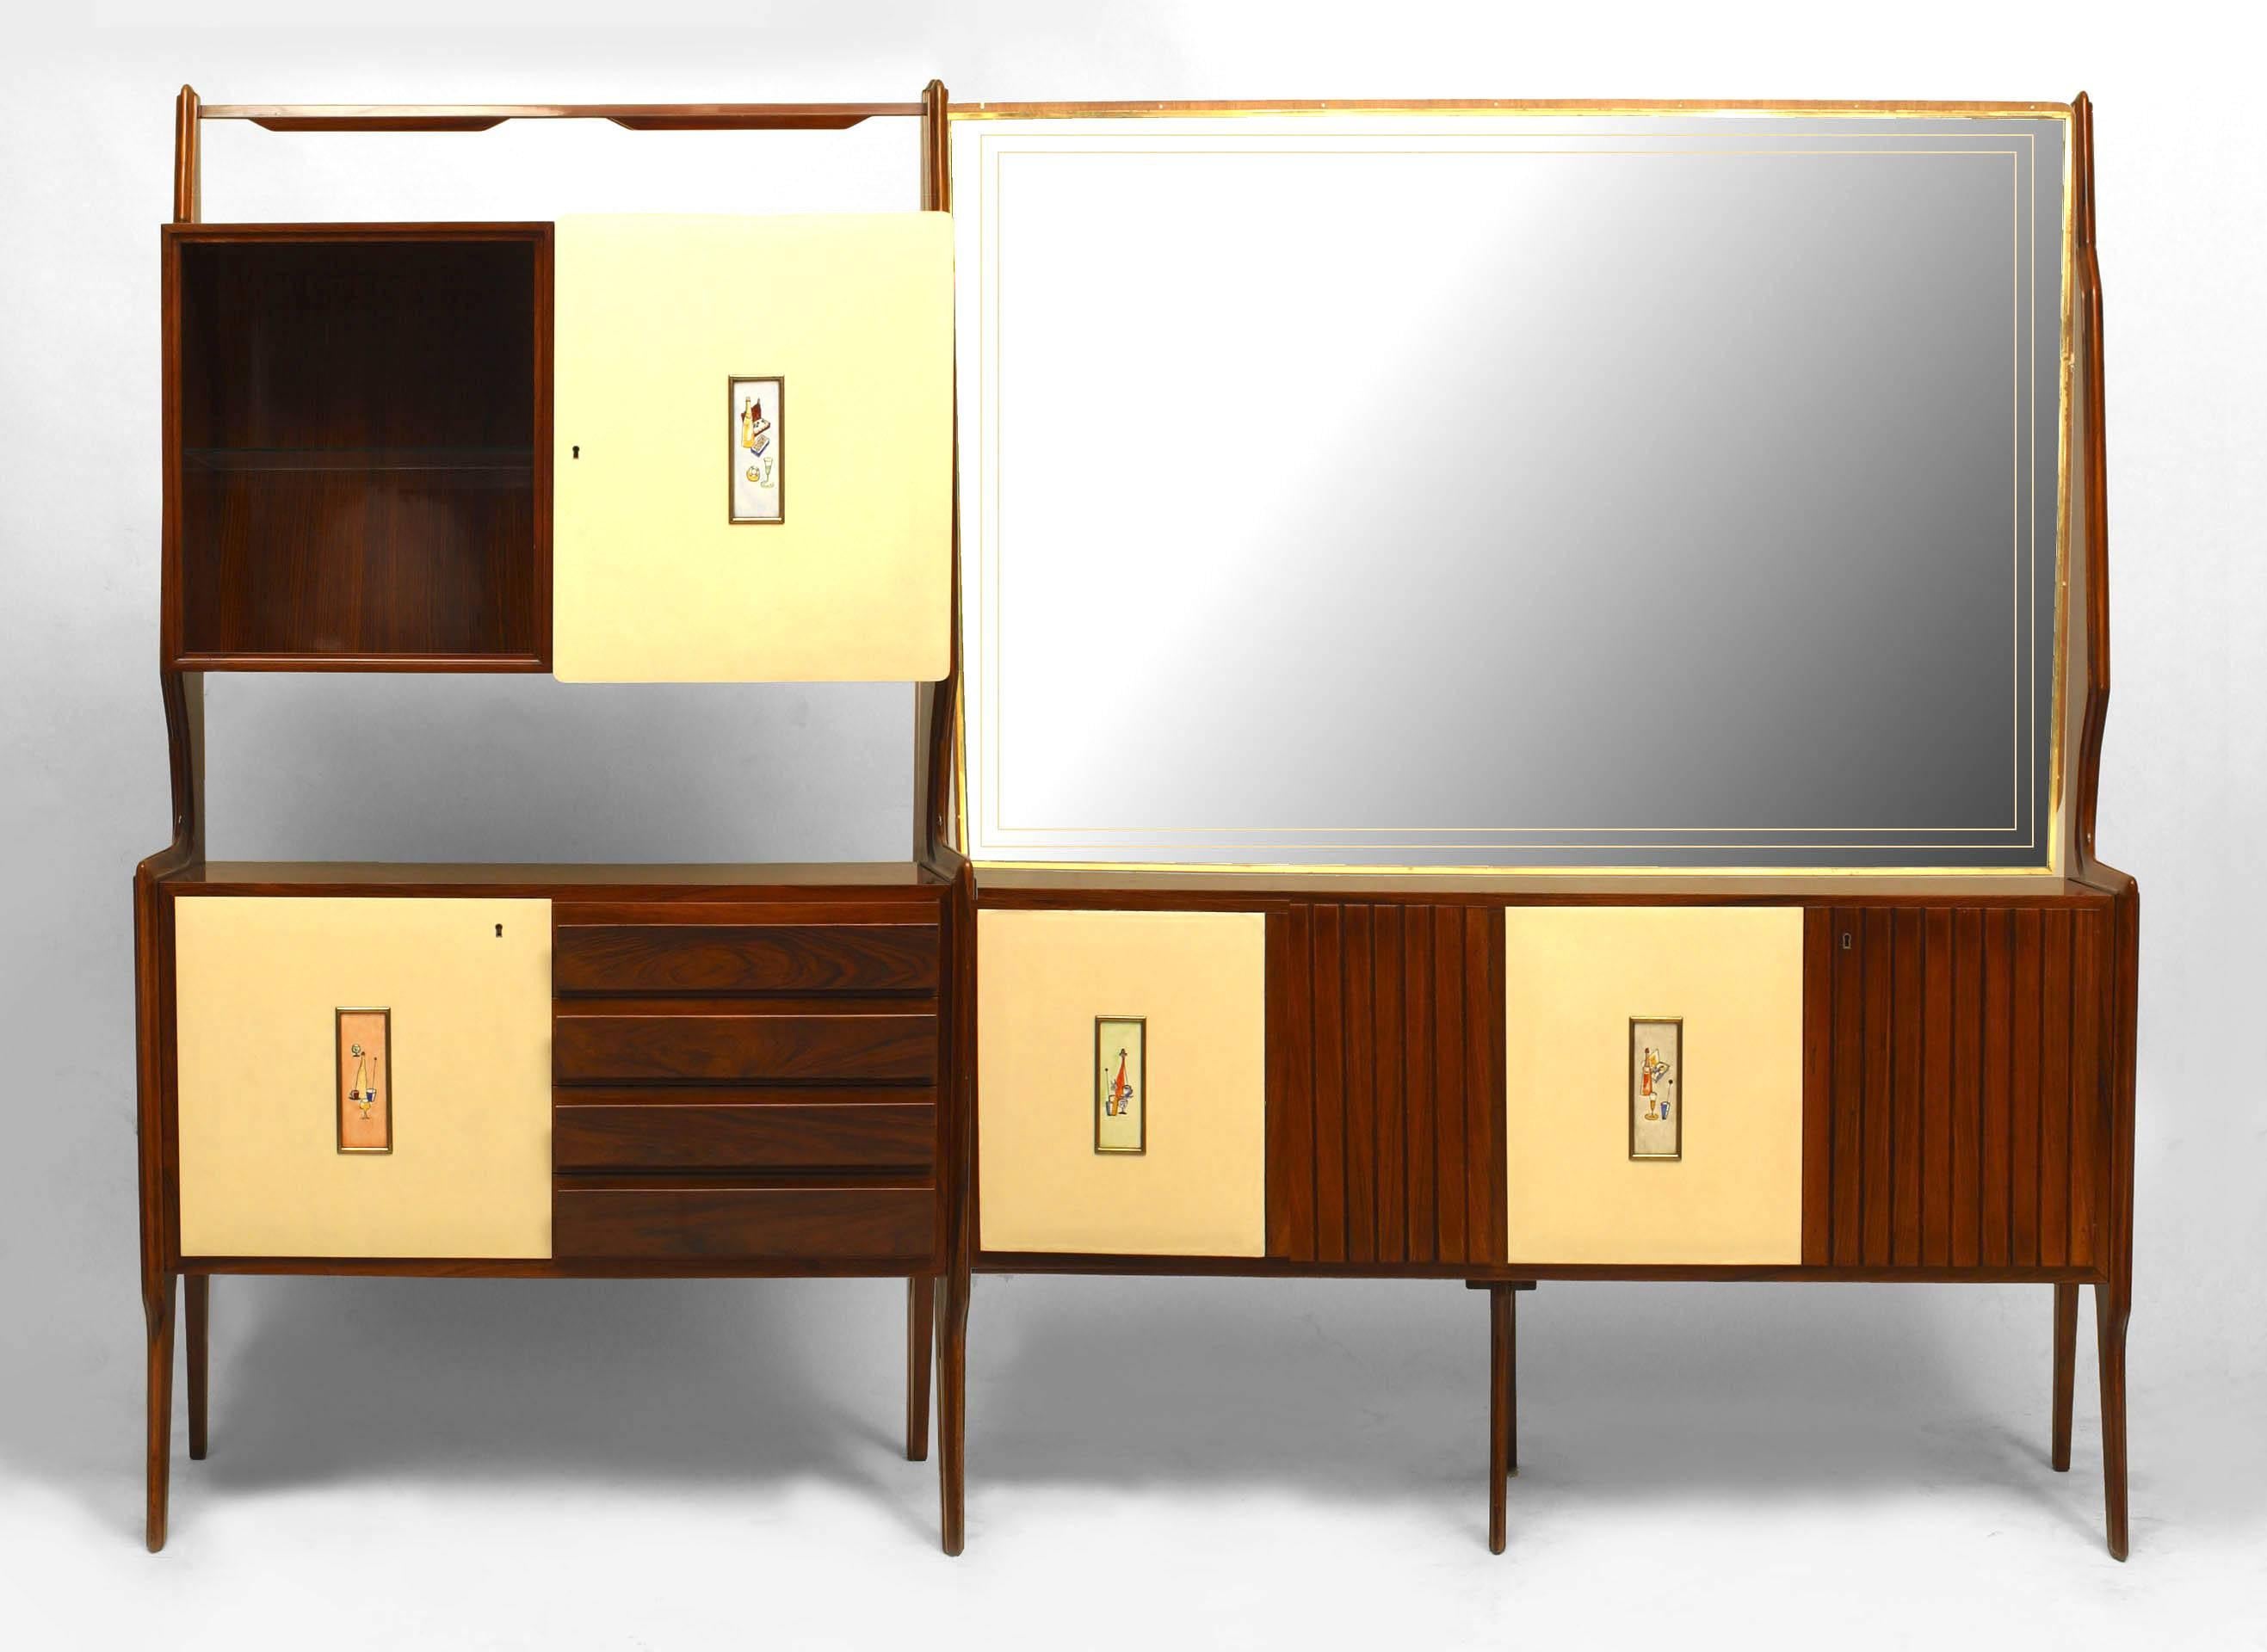 Italian Post-War Design (1950s) rosewood and mahogany wall unit bar with 3 lower commodes and upper cabinet decorative tiles on white lacquered doors and a large mirror (att: GIO PONTI)
